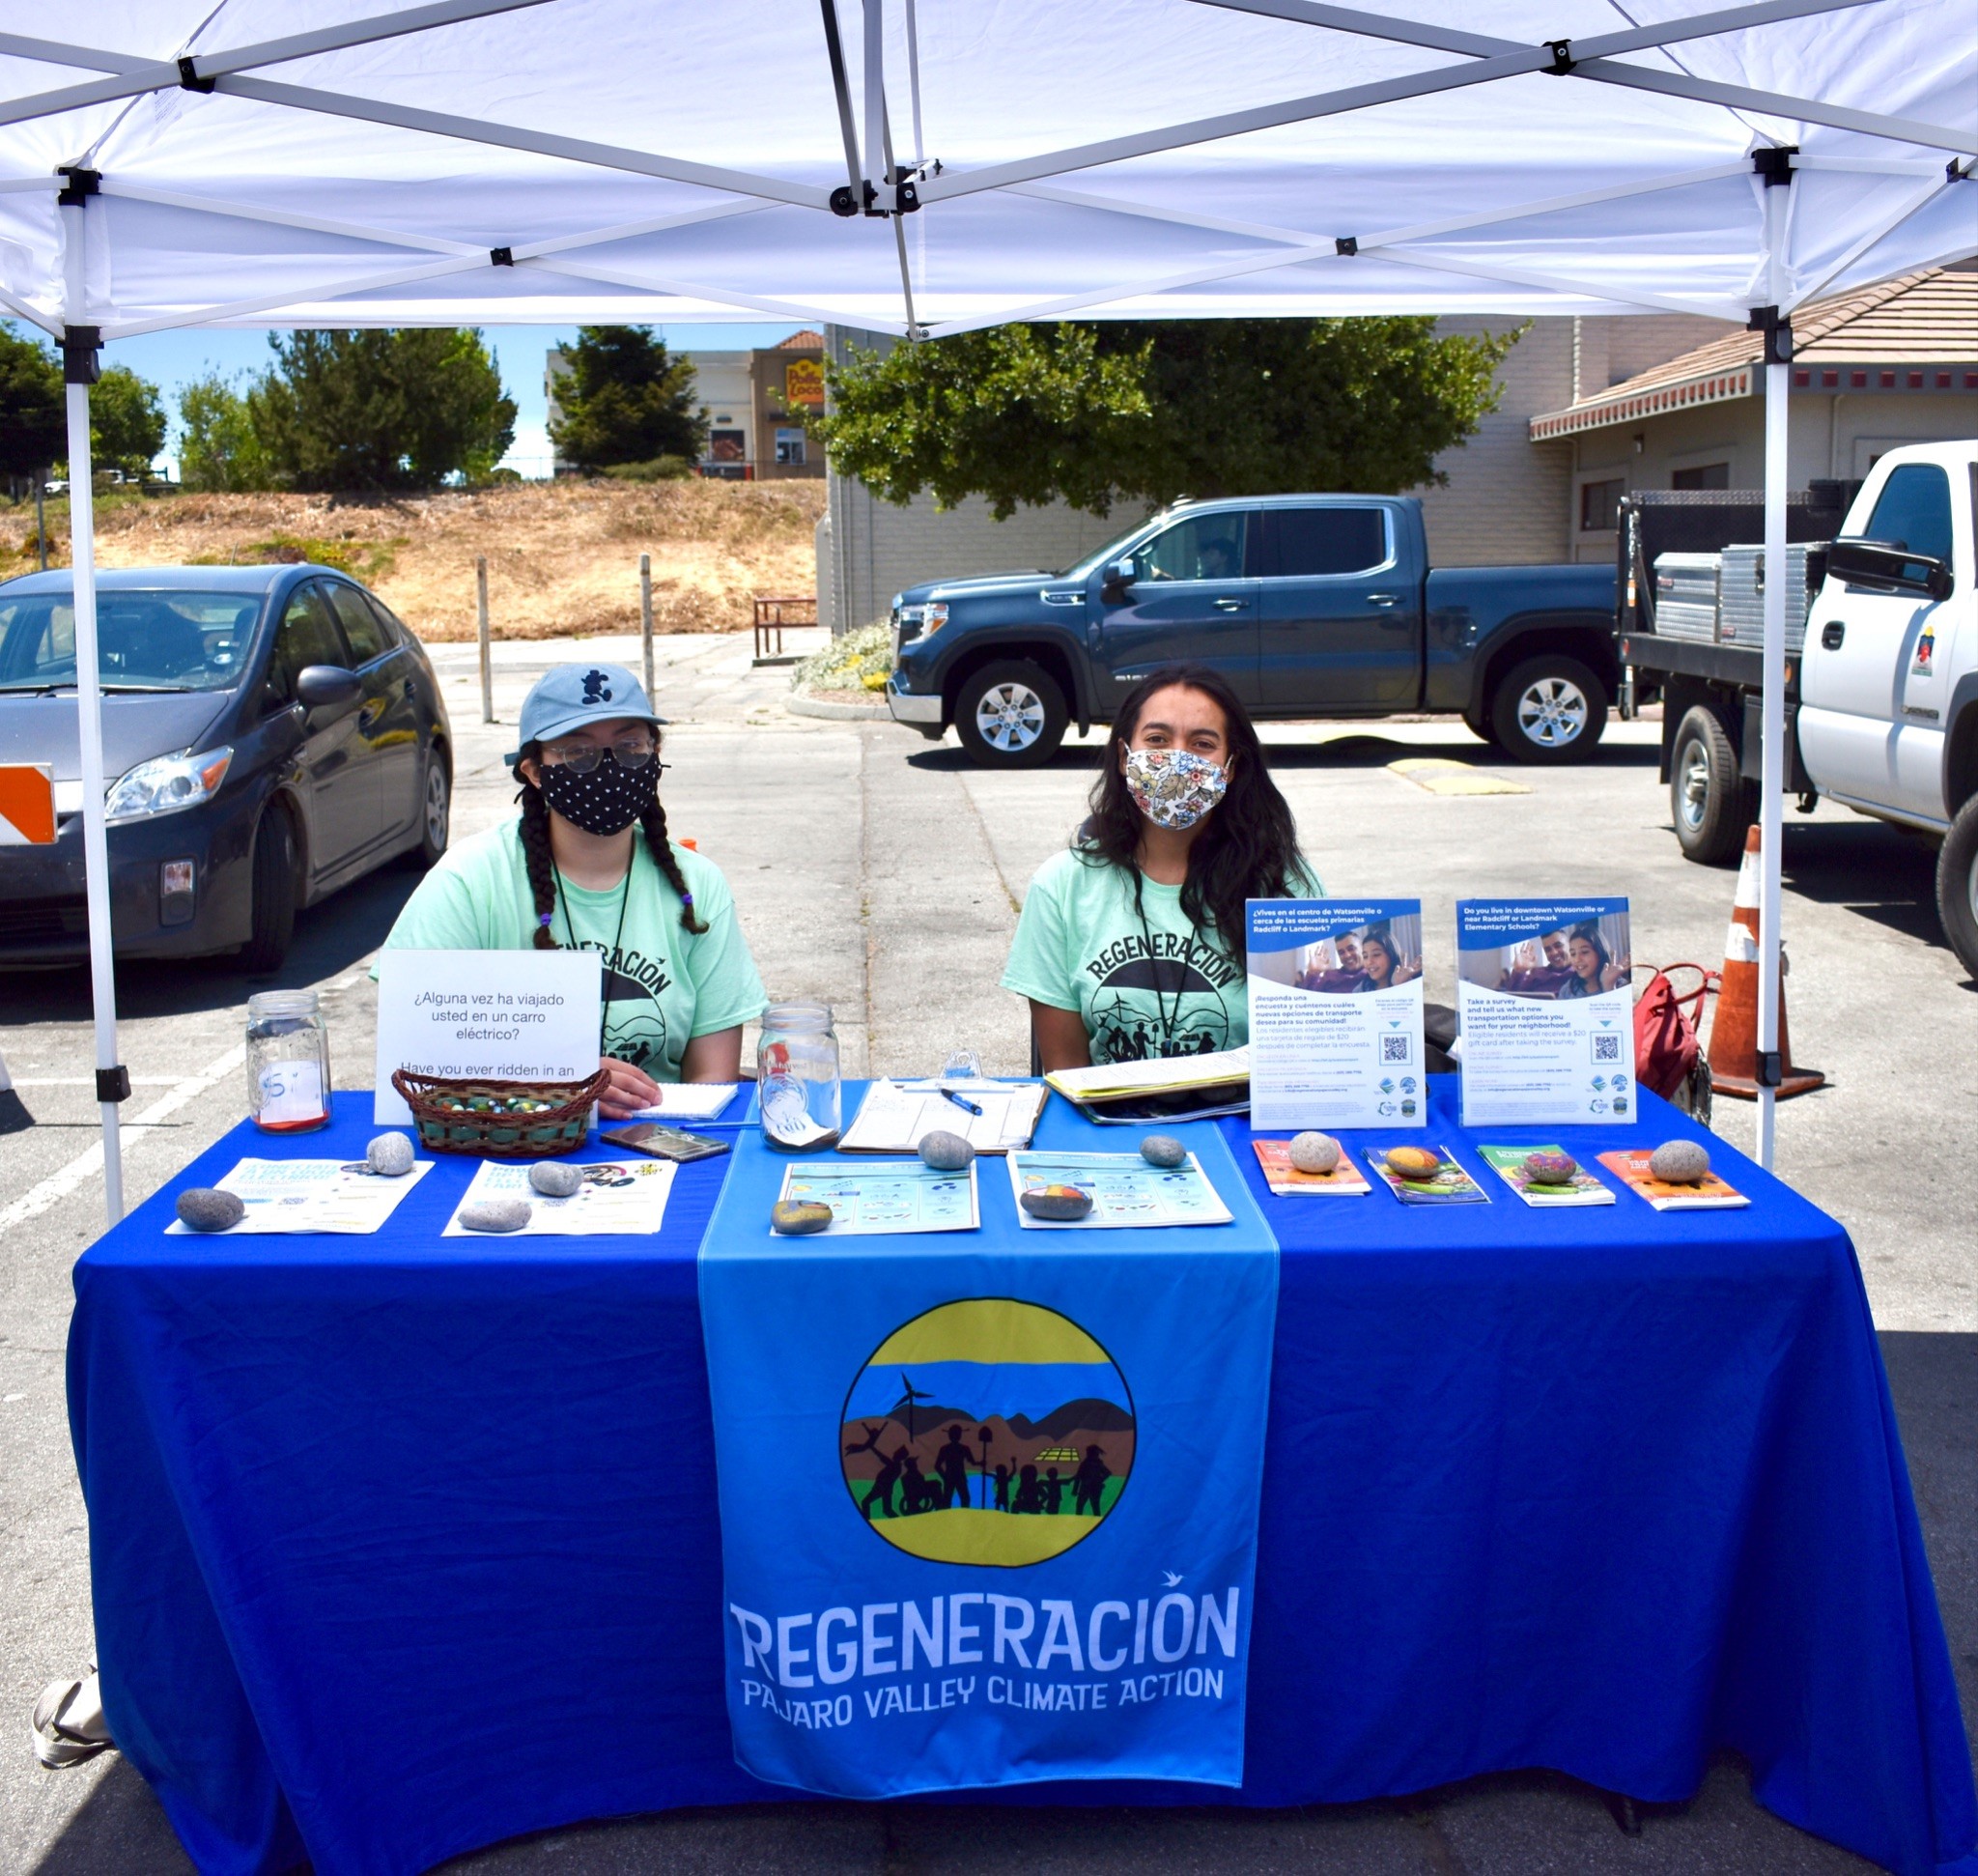 Social Good Fund Project Regeneration survey team members tabling at Farmers’ Market in Watsonville. The two pictured are sitting at an outdoor booth with materials displayed on the table.